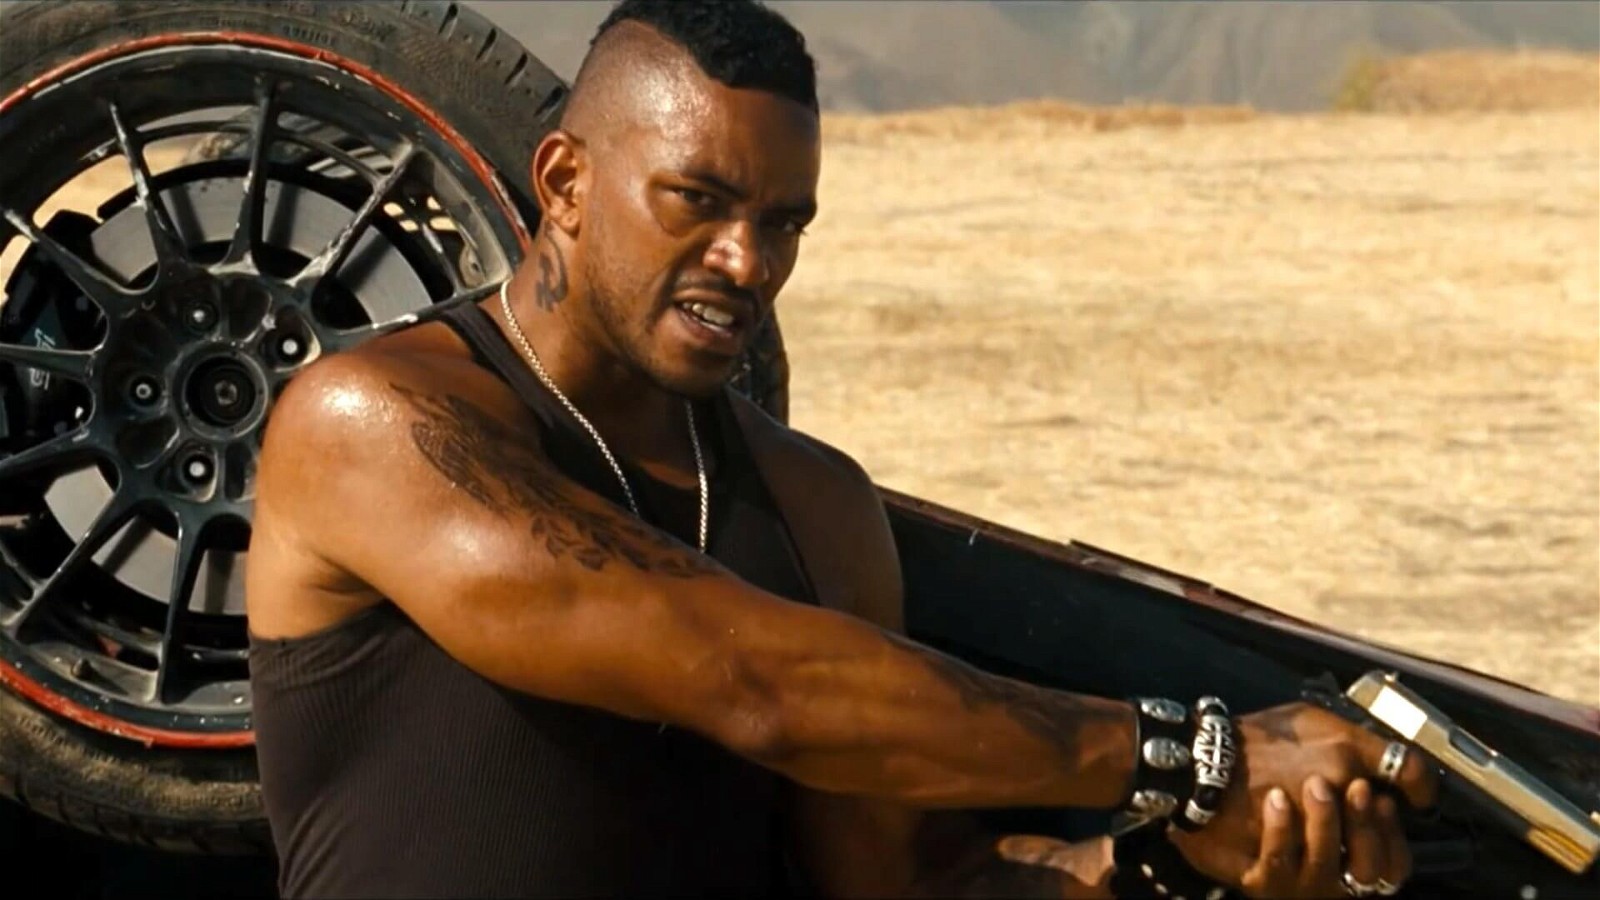 Laz Alonso played the antagonist in Fast & Furious